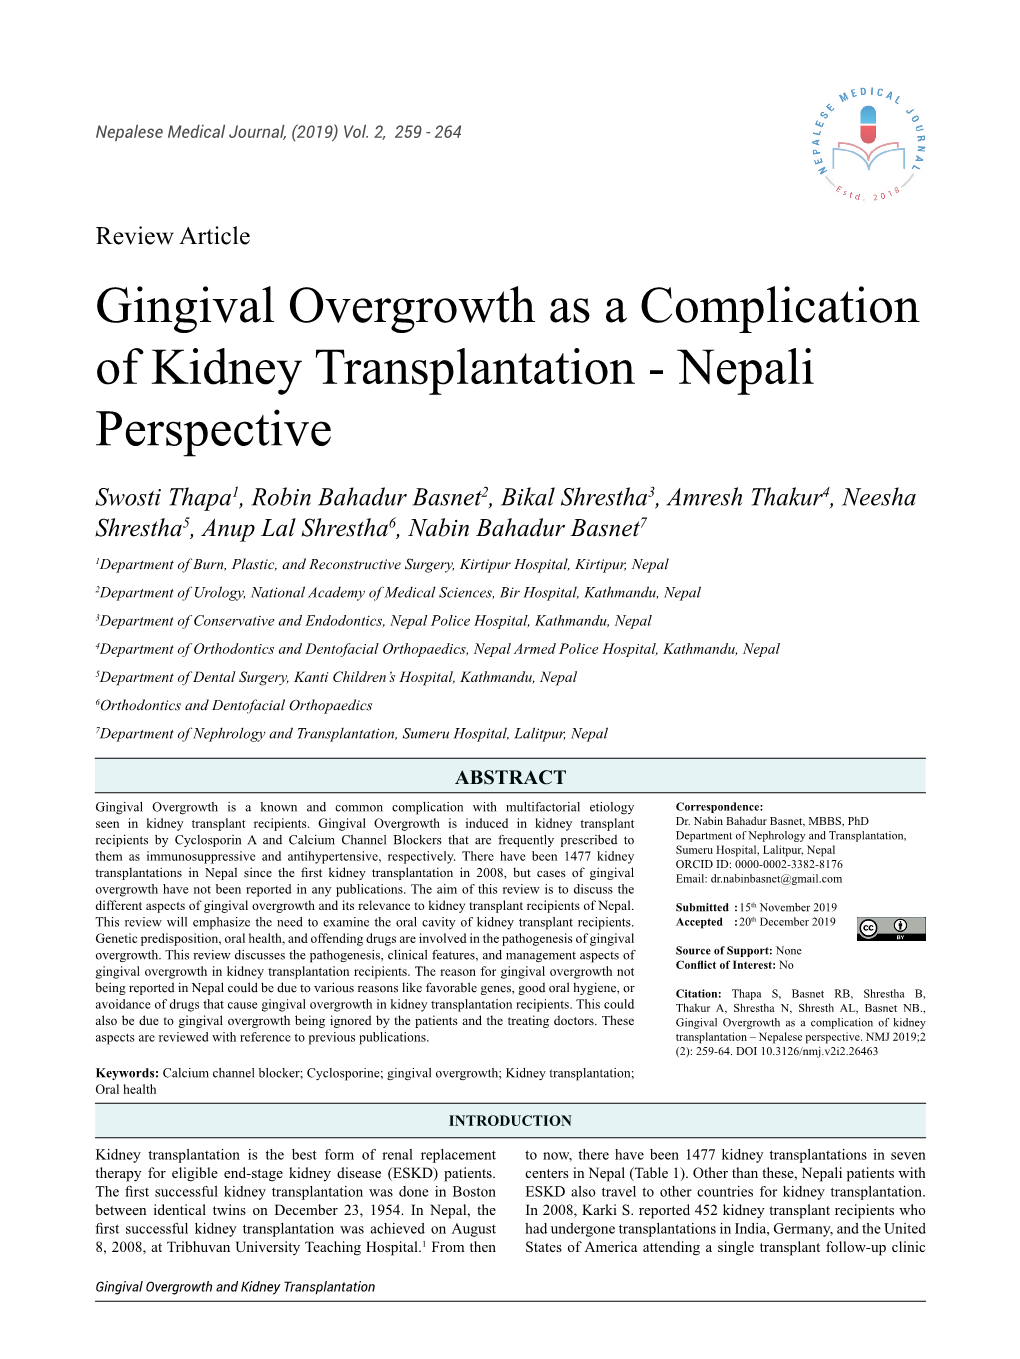 Gingival Overgrowth As a Complication of Kidney Transplantation - Nepali Perspective